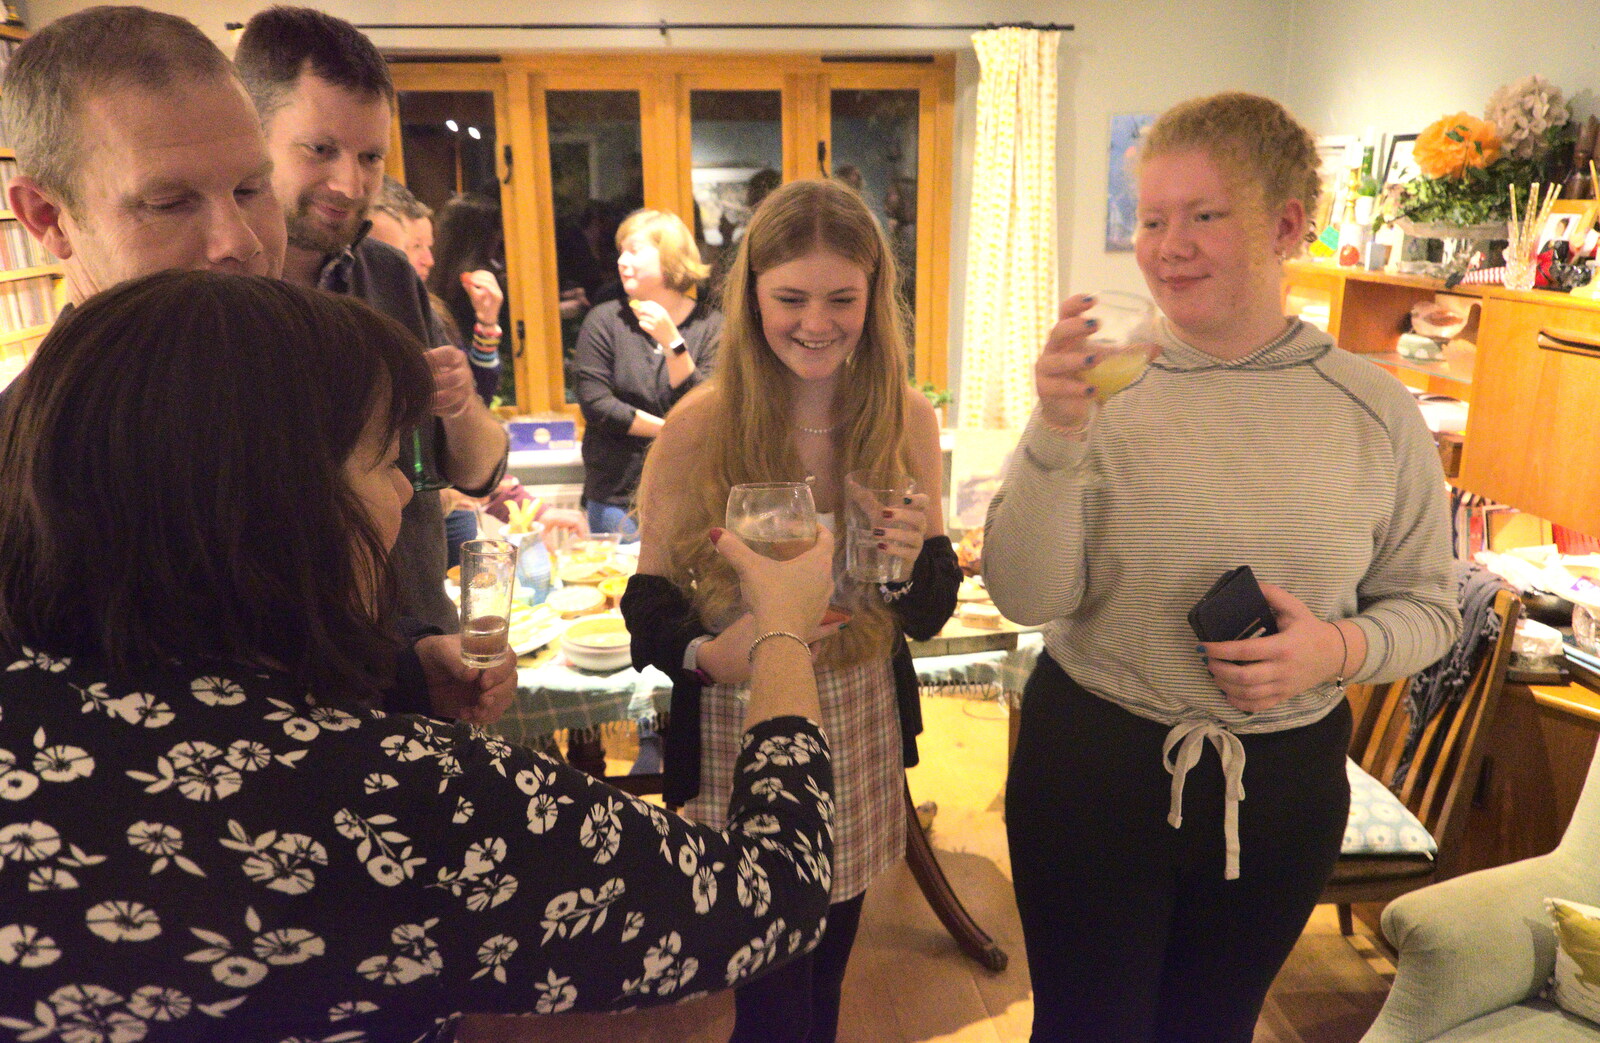 Clare reaches in with a toast from A New Year's Eve Party, Brome, Suffolk - 31st December 2022